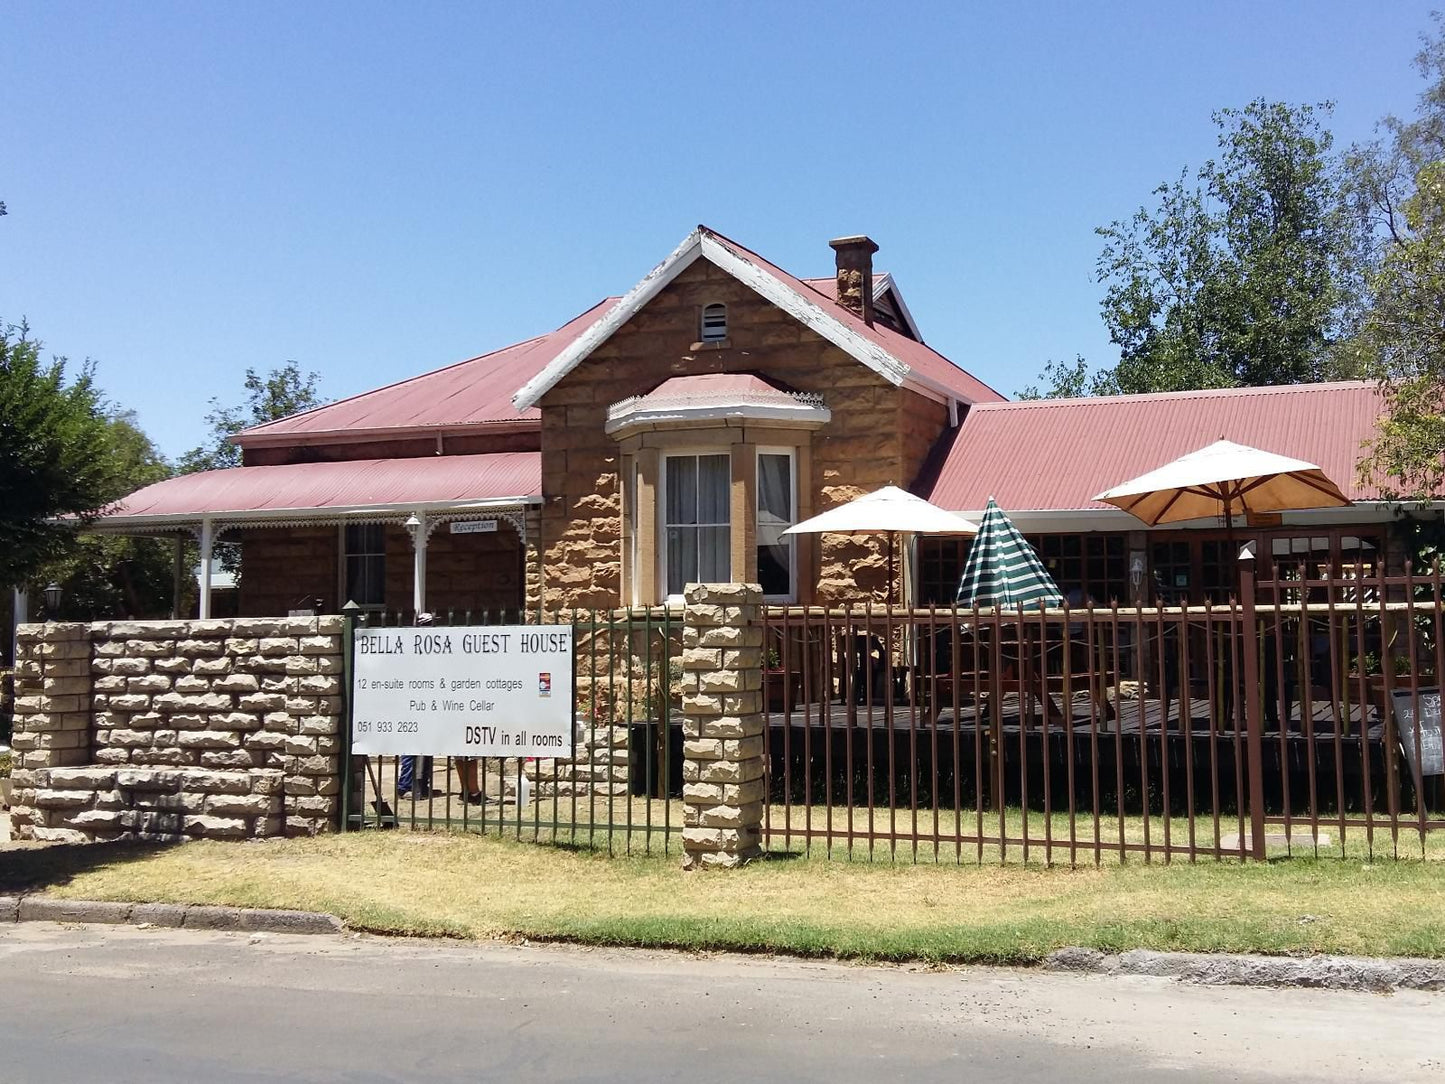 Bella Rosa Guest House Ficksburg Free State South Africa House, Building, Architecture, Sign